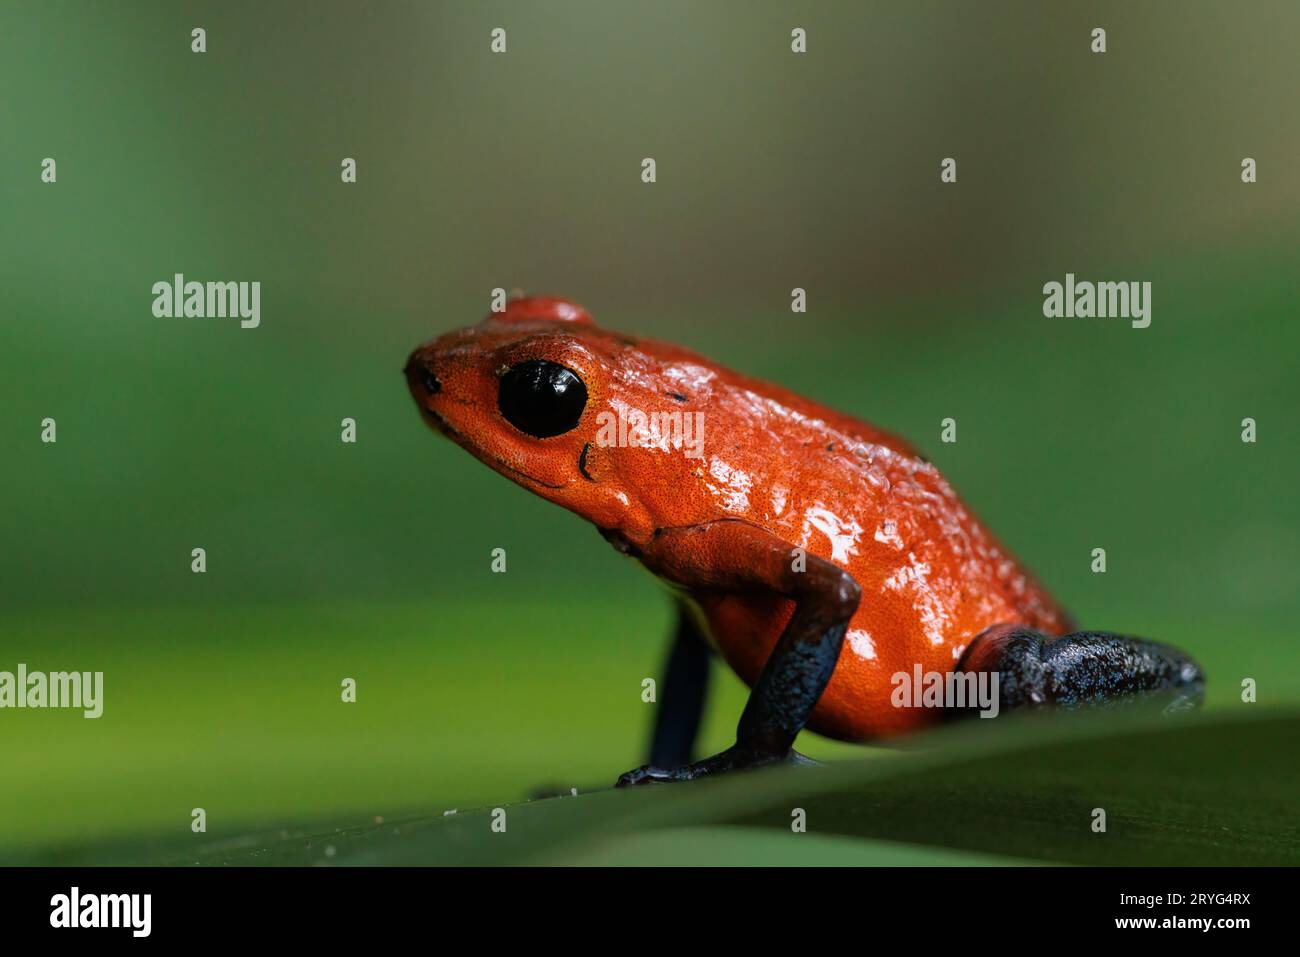 Blue-Jeans frog a.k.a strawberry frog perching on a green leaf in Costa Rica Stock Photo